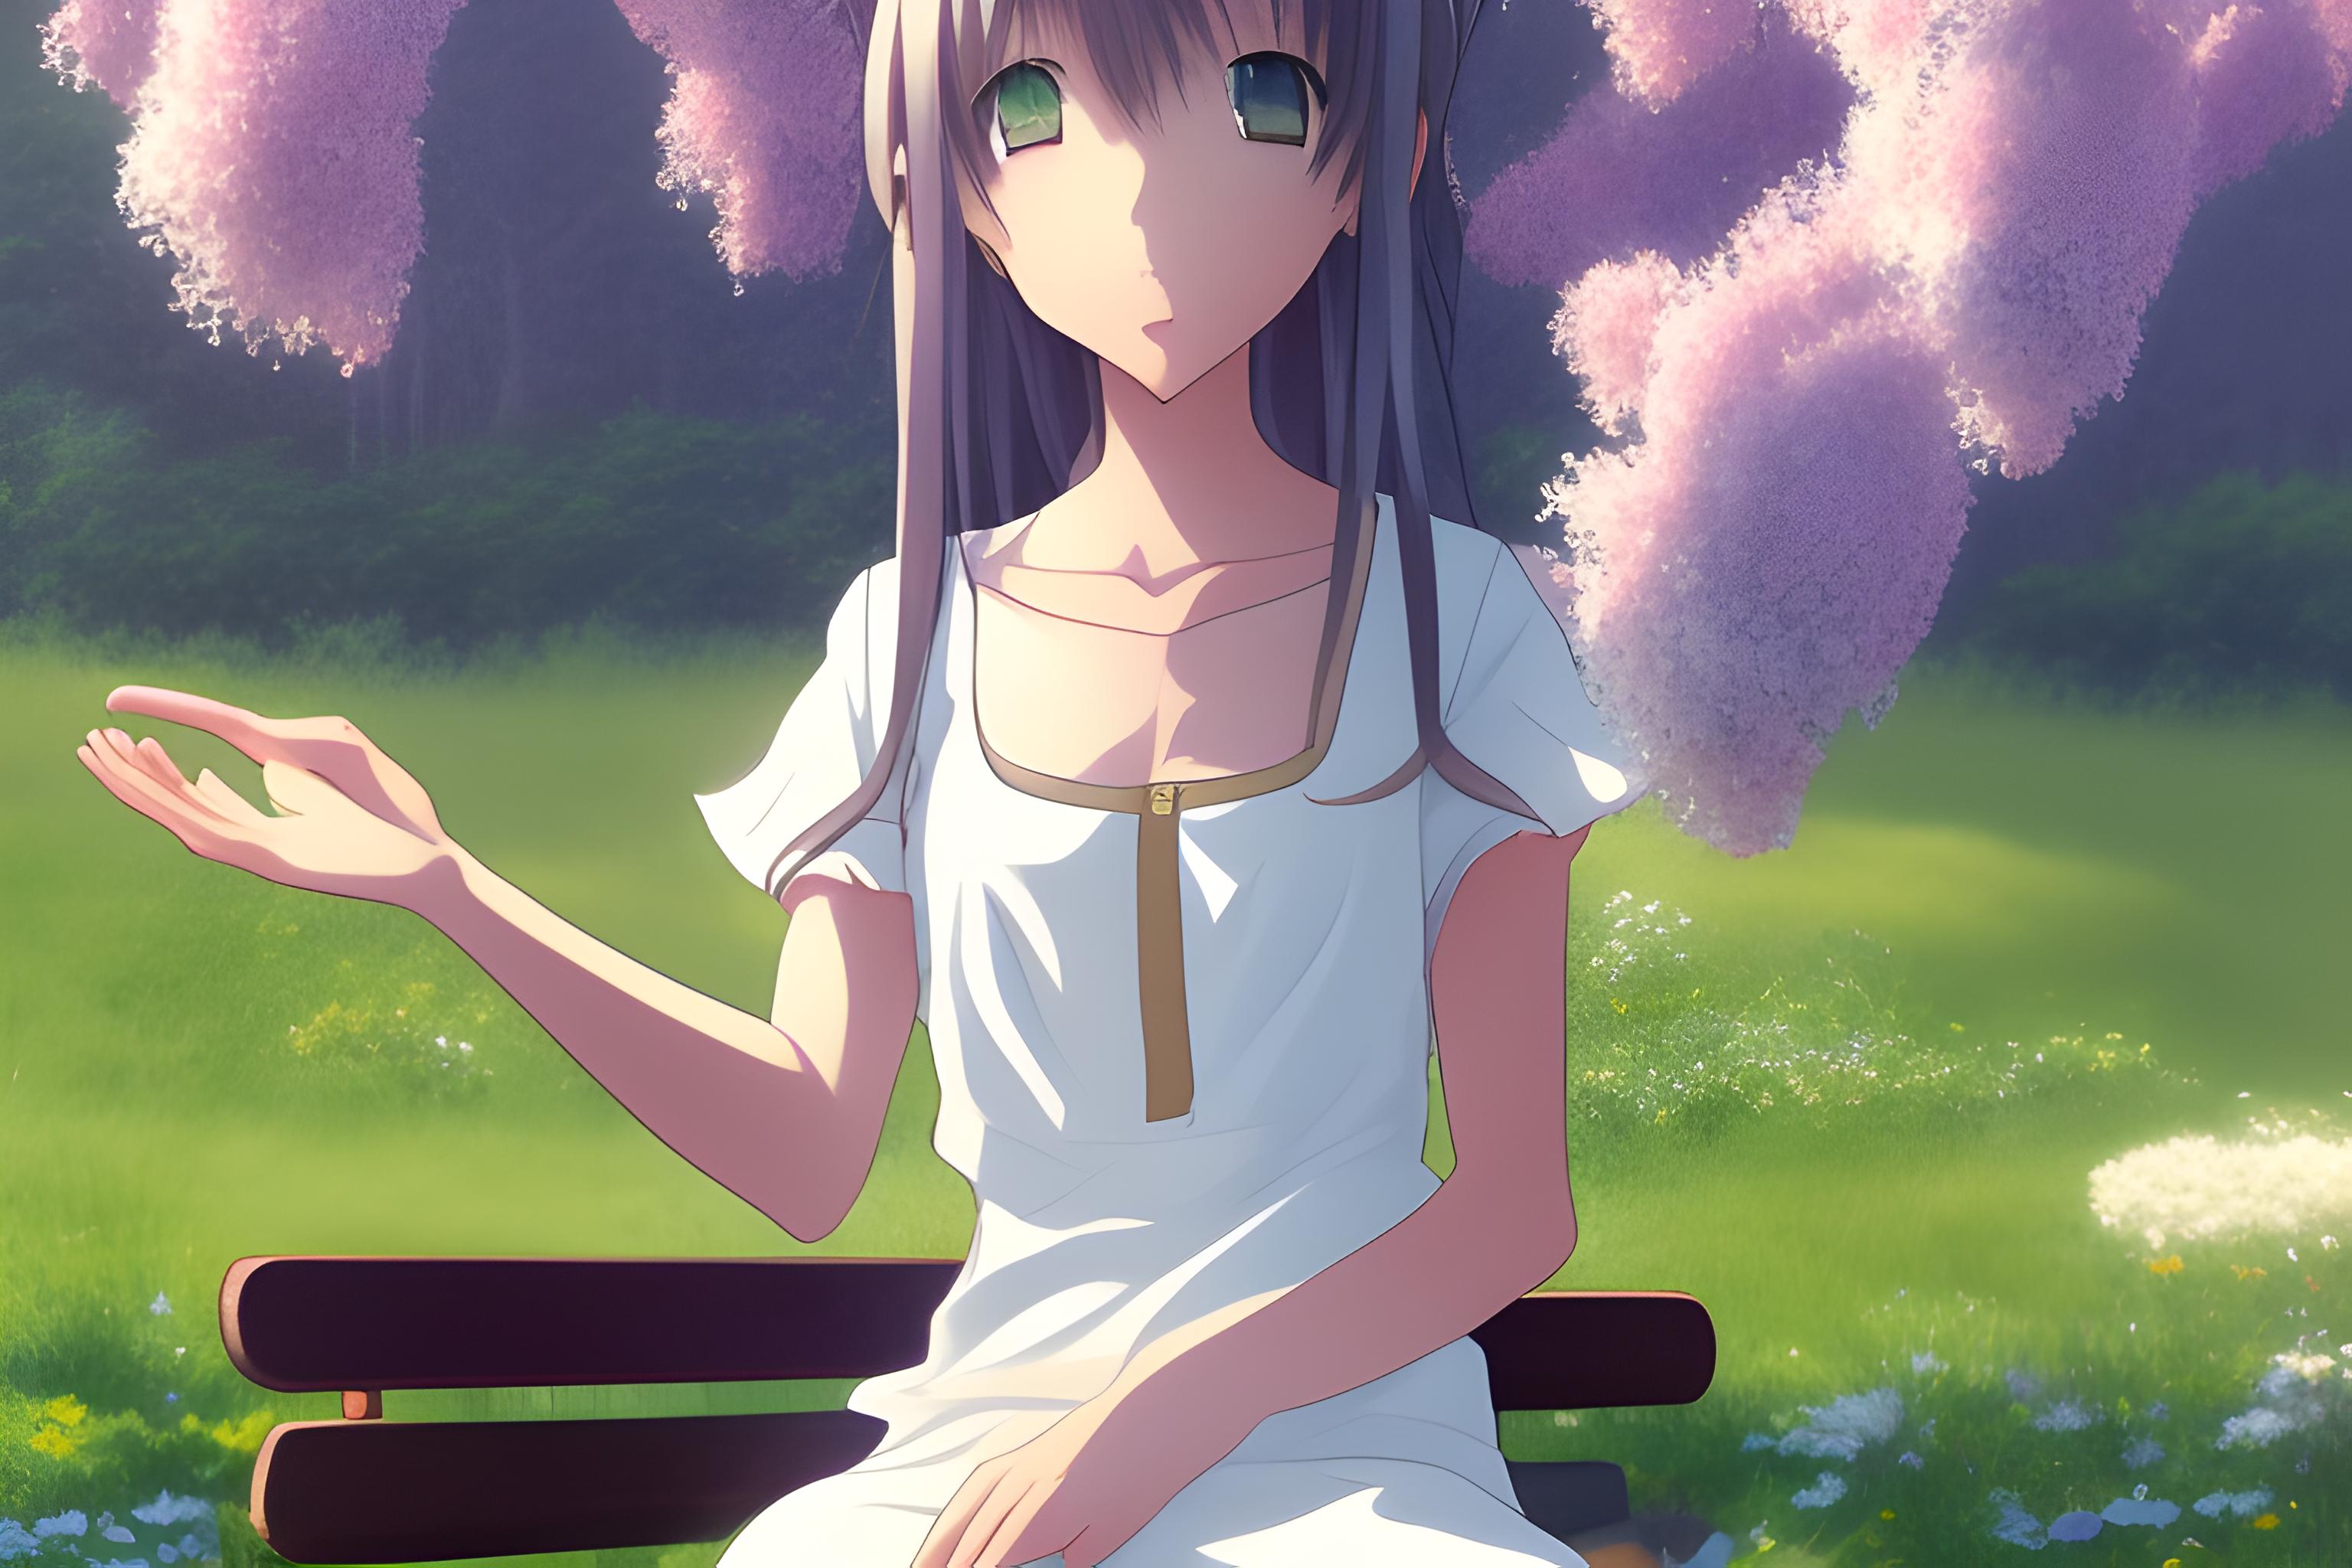 prompthunt: anime girl sitting on a bench, highly accurate and  proportional, spring time, cherry blossom in the background